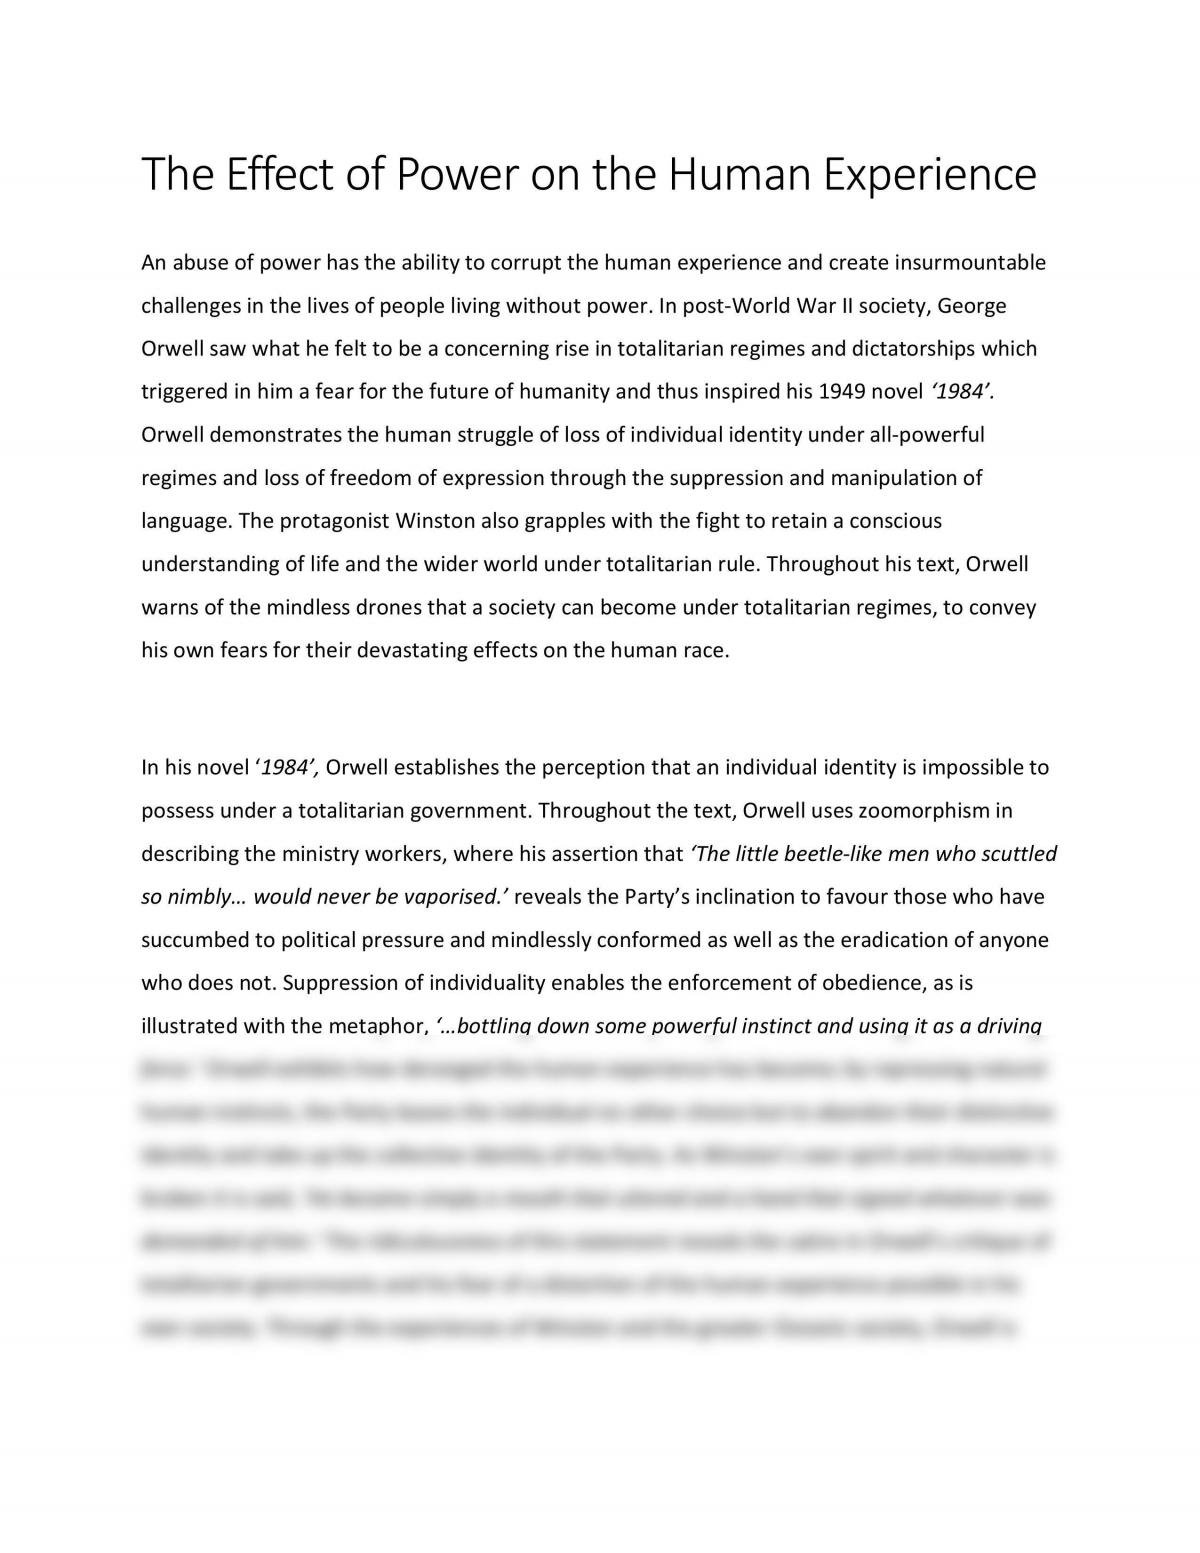 The Effect of Power on the Human Experience Essay  - Page 1